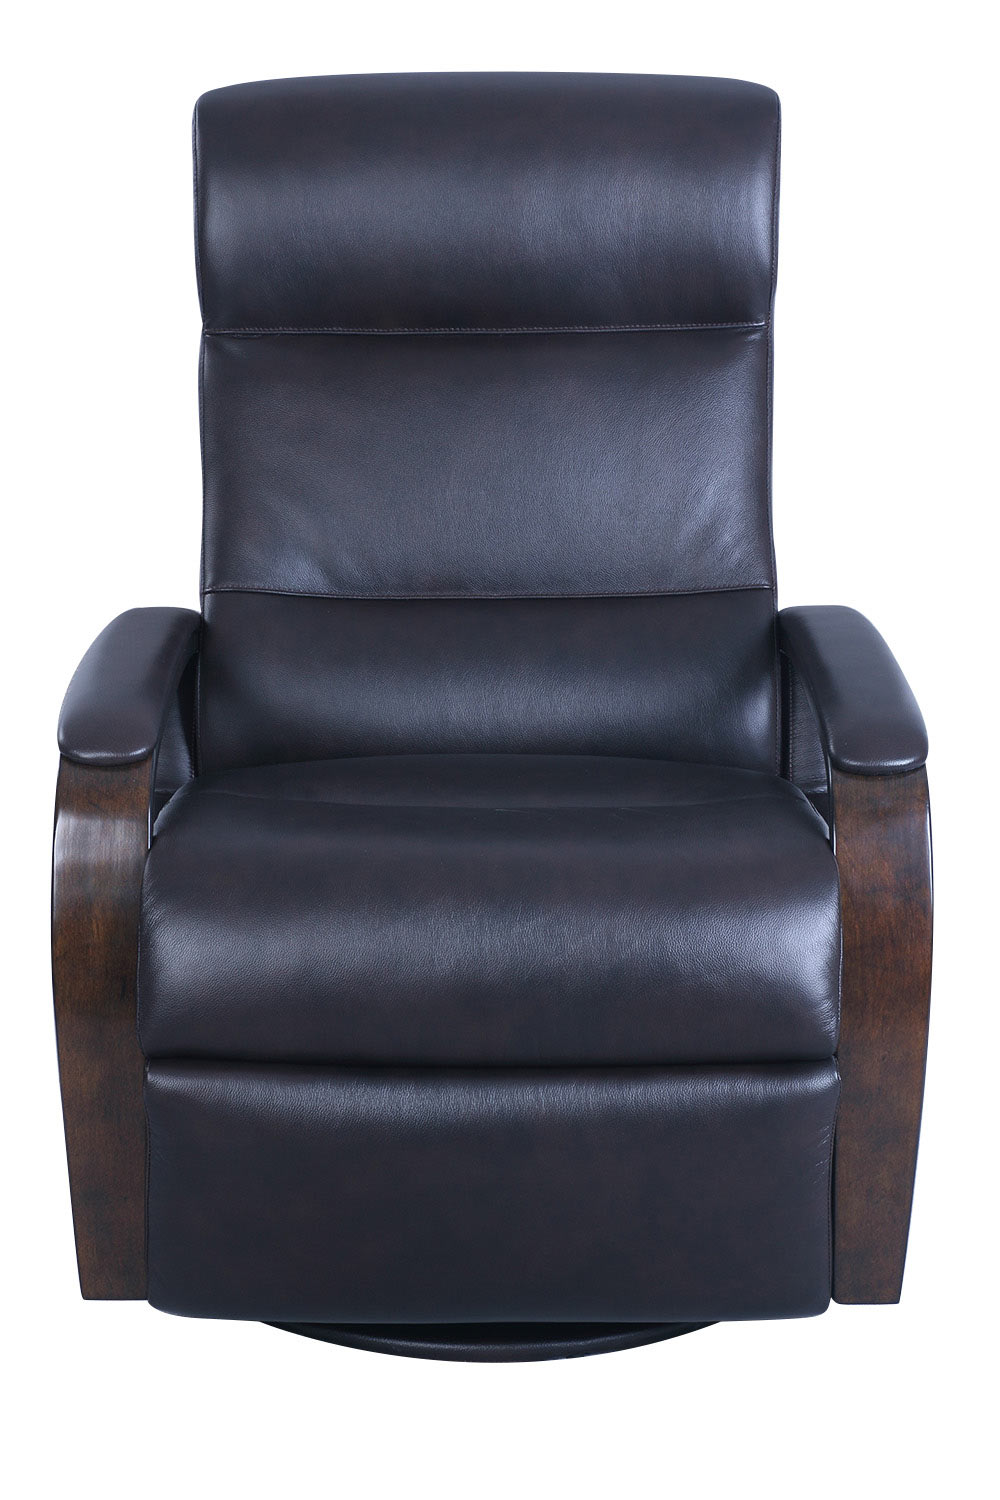 Barcalounger Carlos Swivel Glider Power Recliner Chair with Power Head Rest - Dobson Chocolate/Leather Match